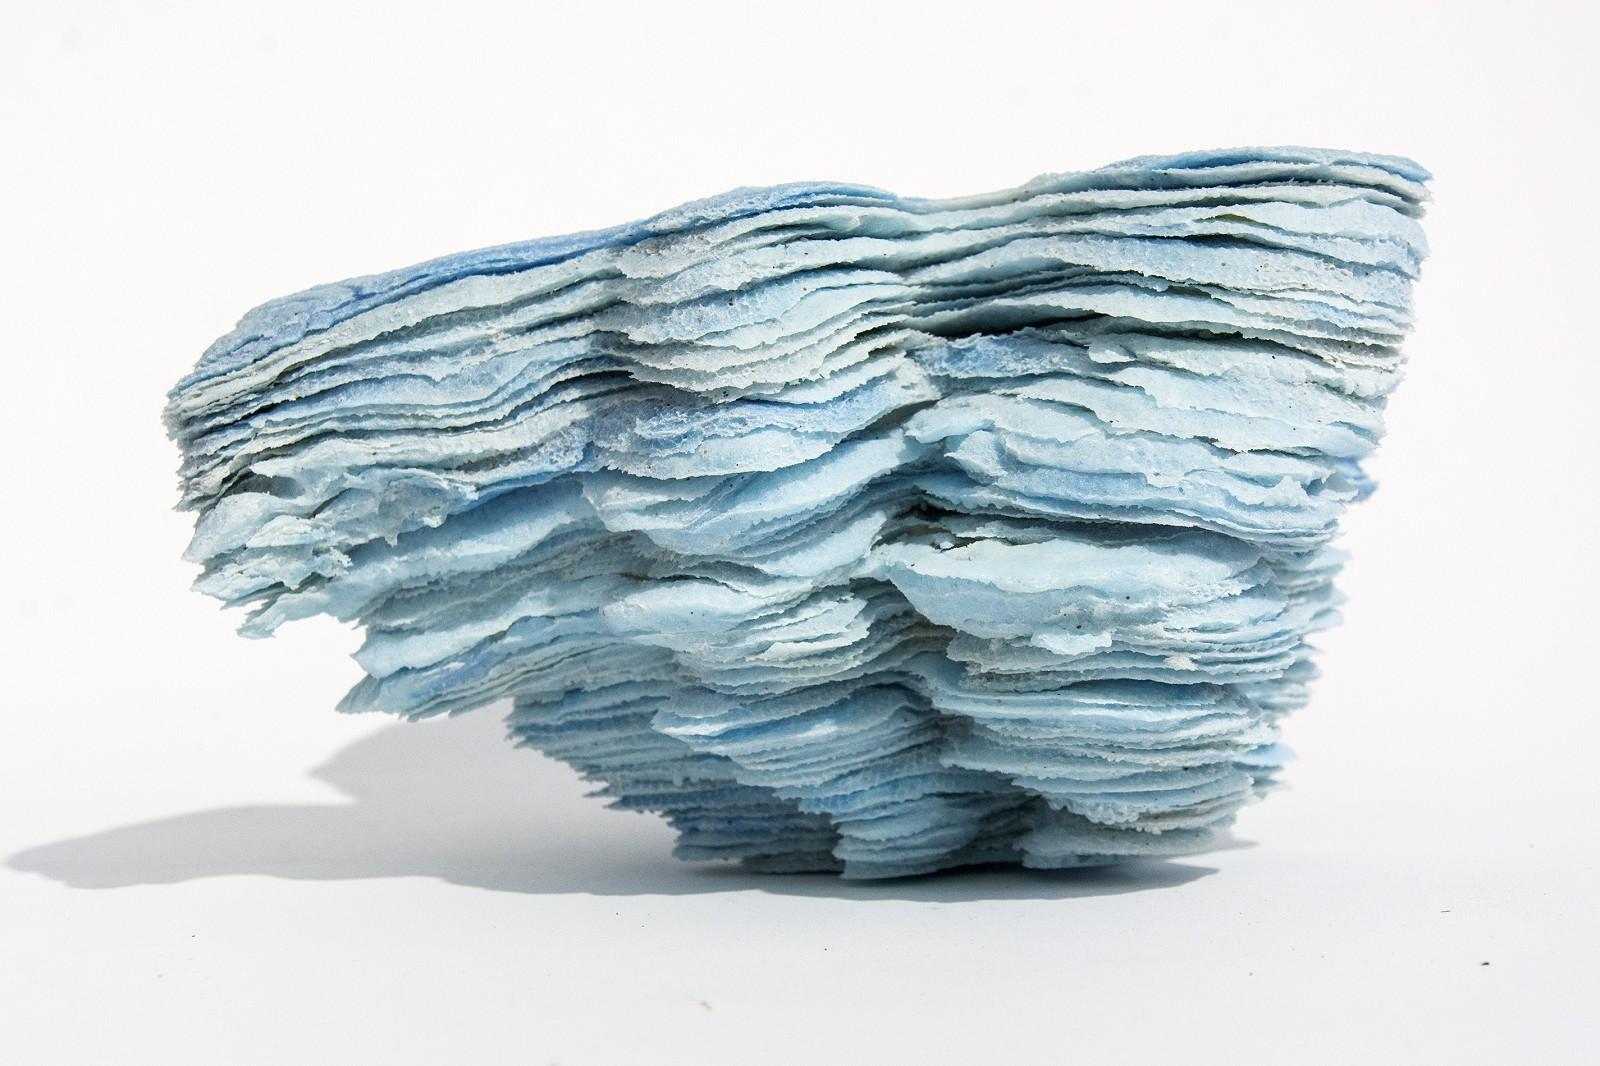 Ocean Airc - Delicate layers of ice blue glass frit - Gray Abstract Sculpture by Cheryl Wilson Smith